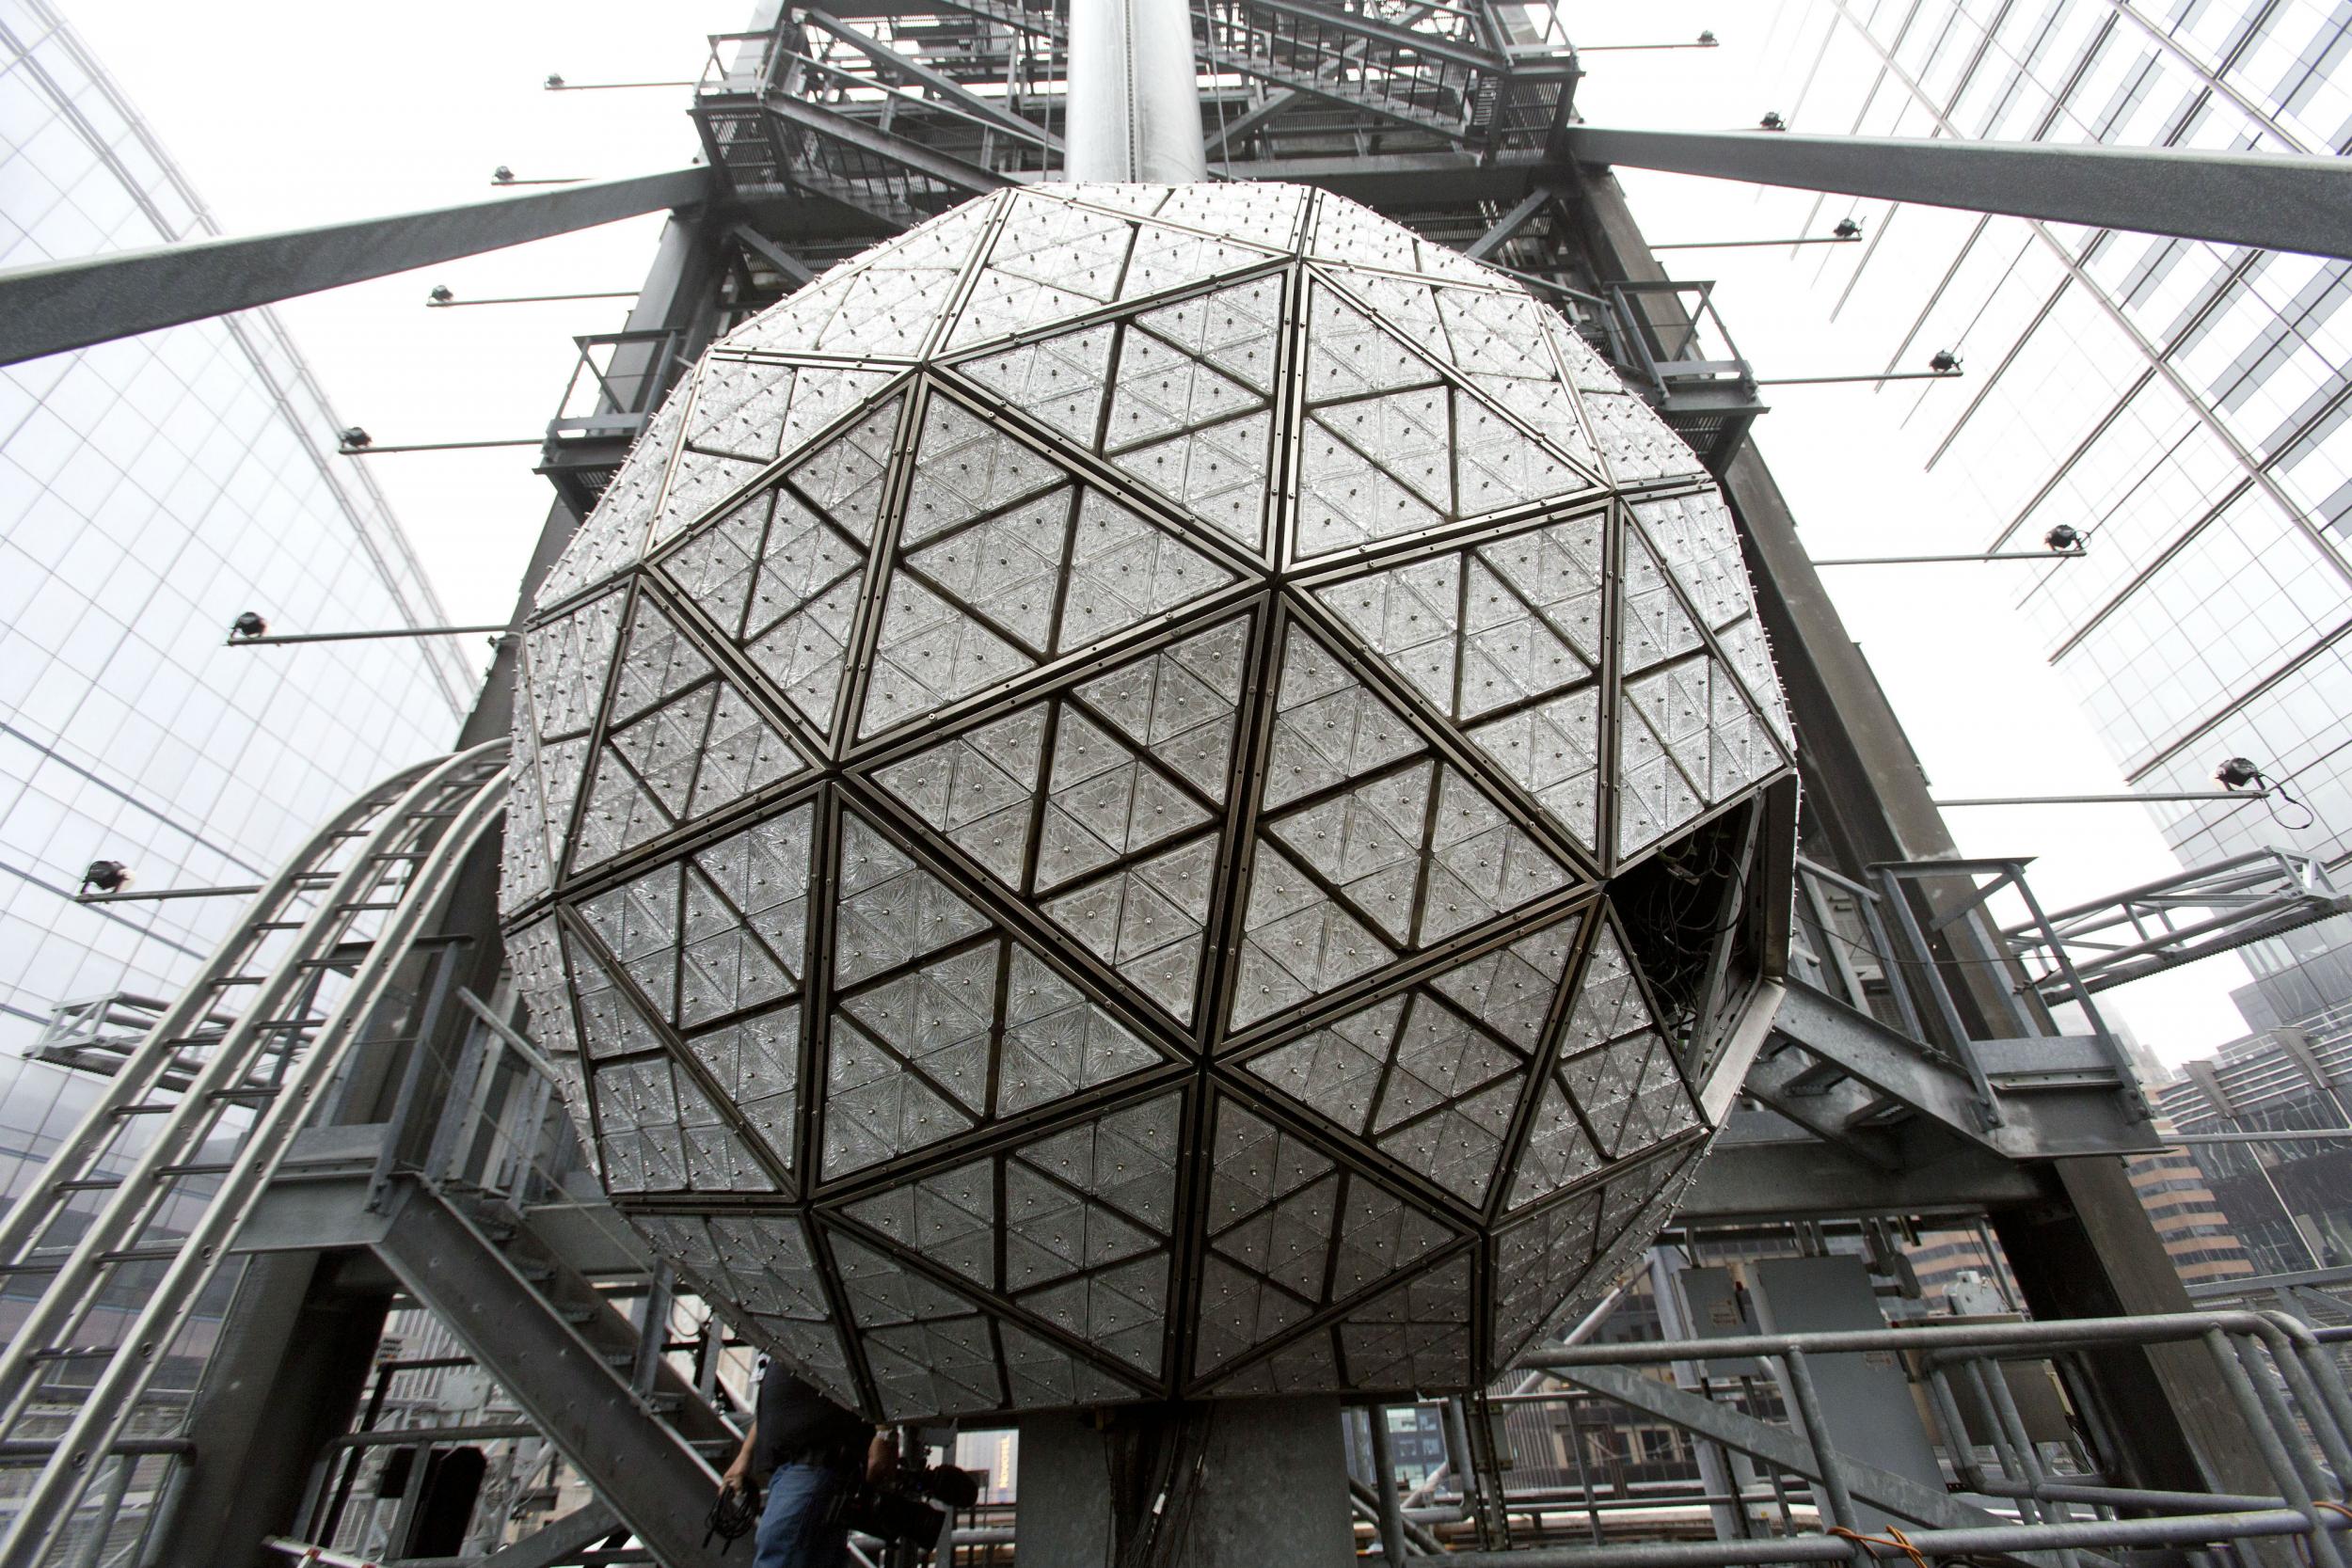 More than 1m people are expected to watch the Waterford crystal ball drop at midnight